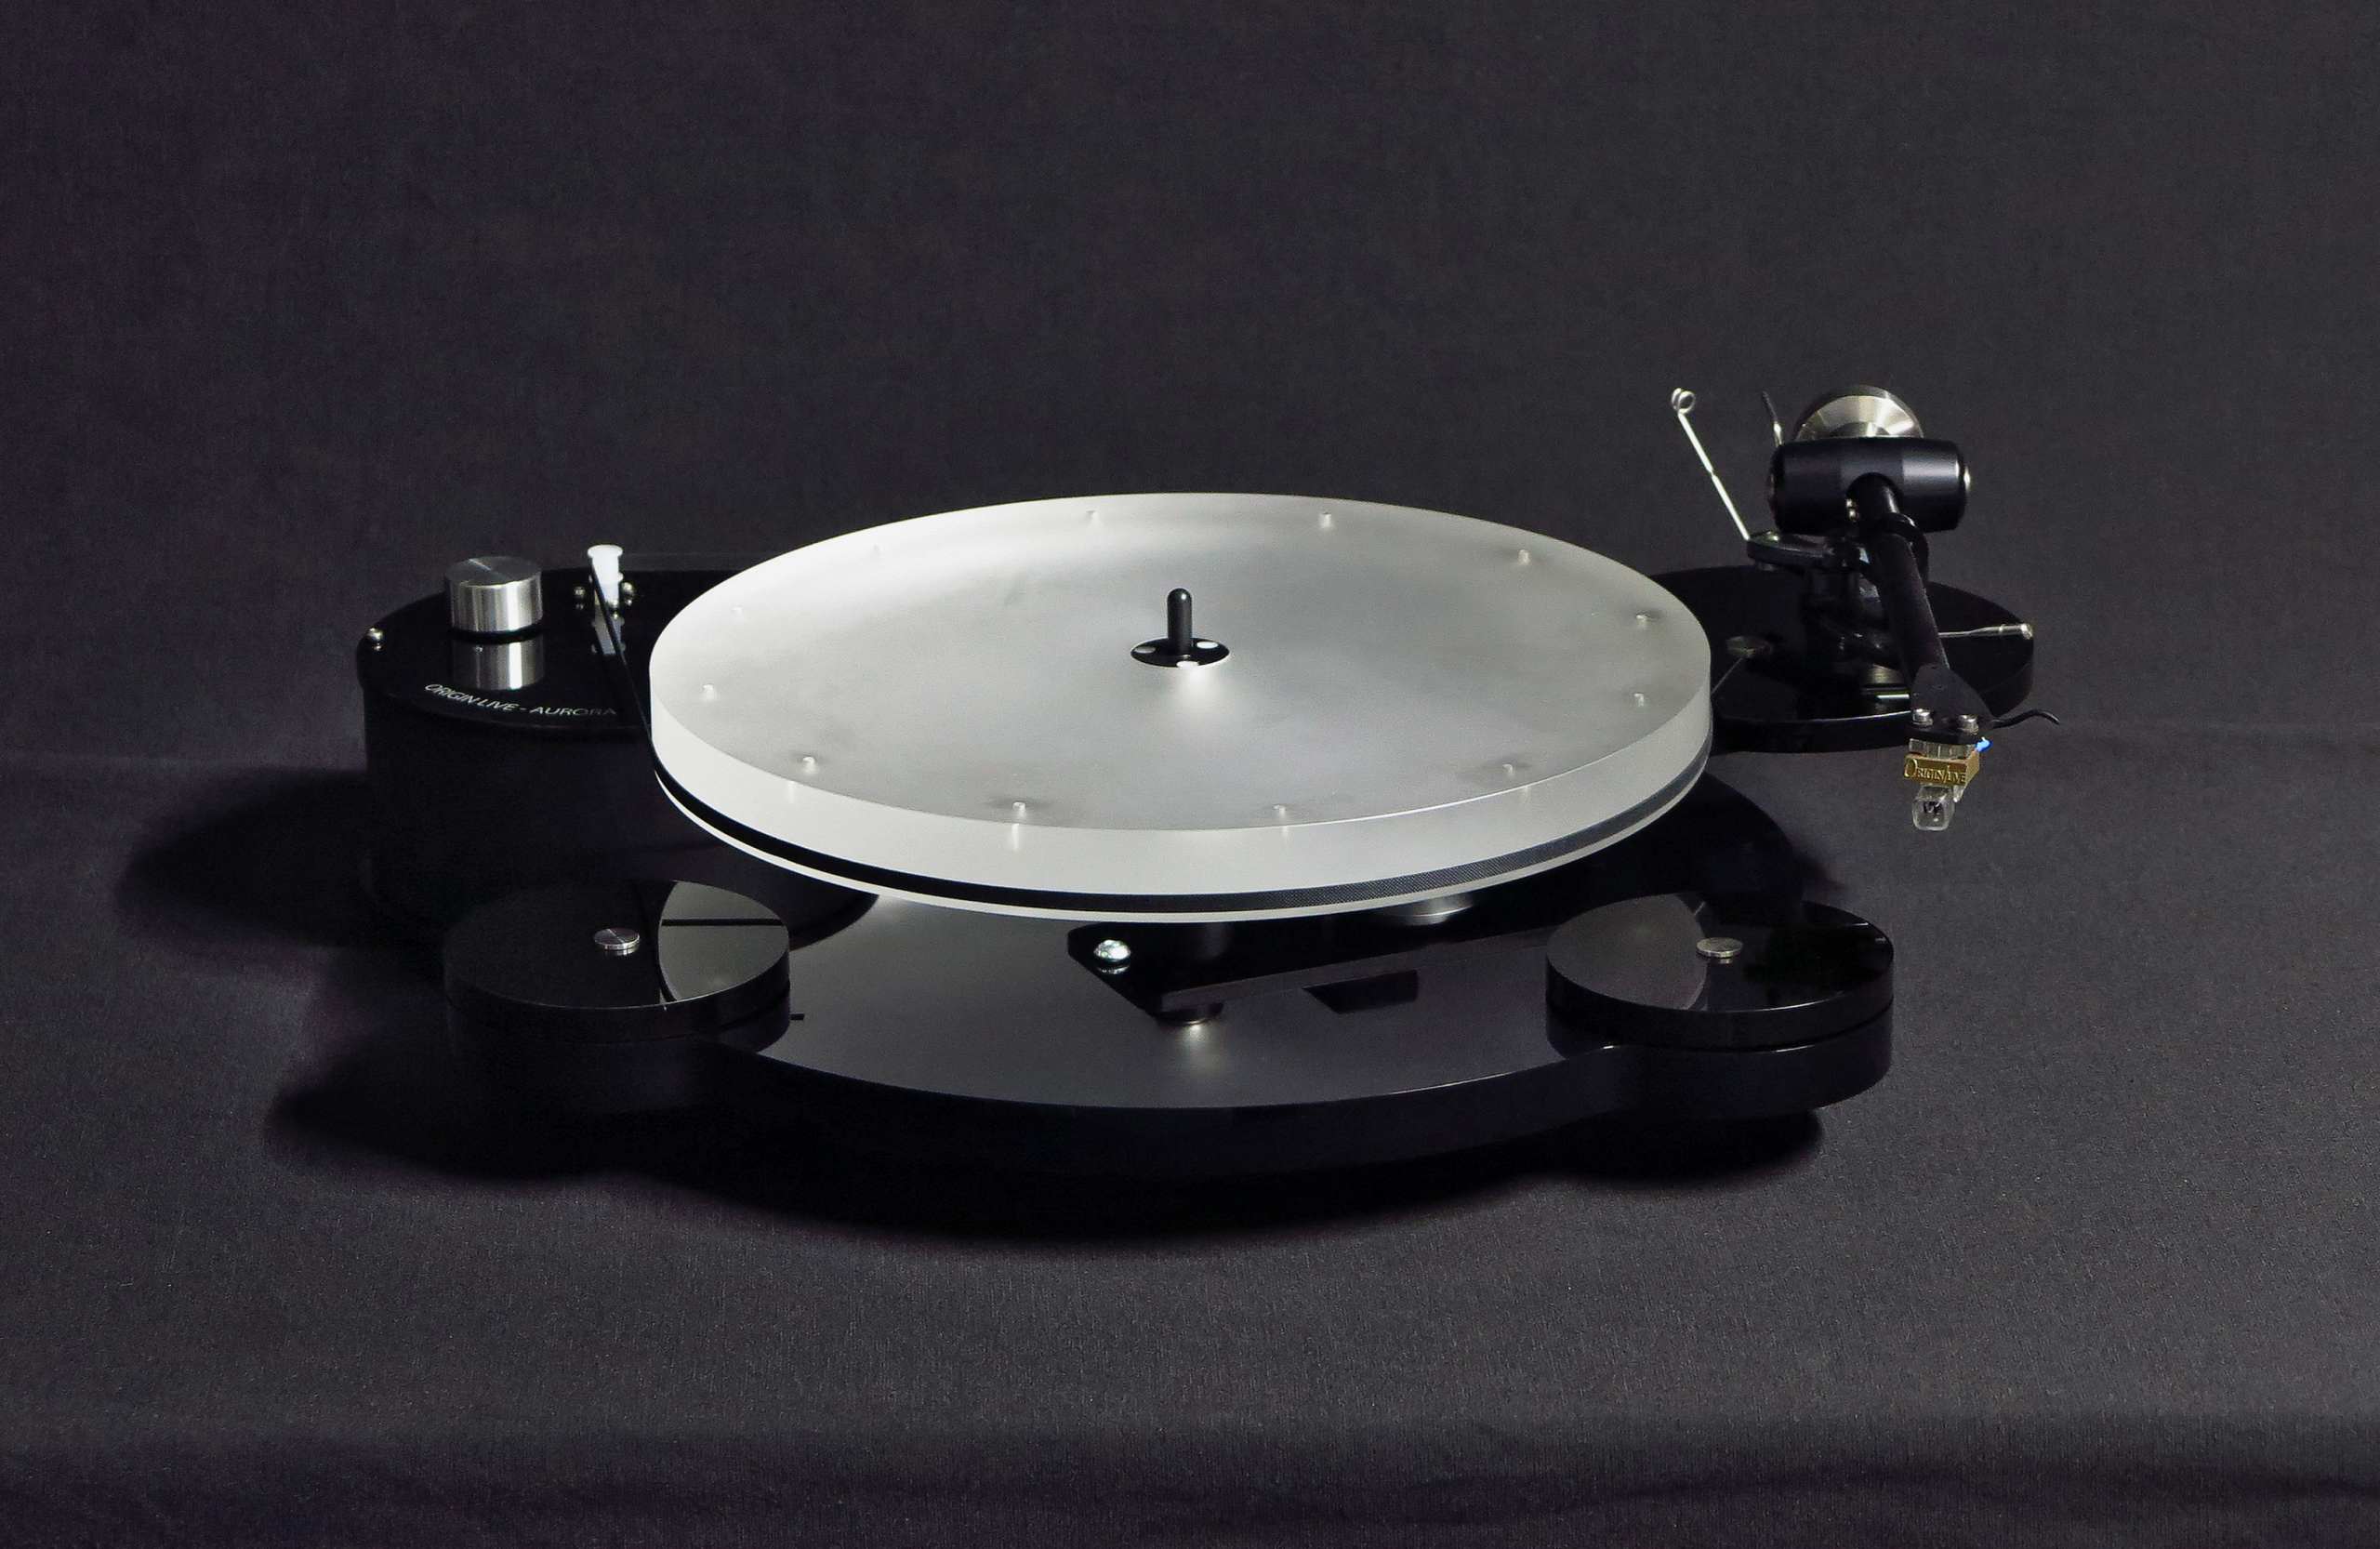 Origin Live Hi-Fi Aurora Turntable fro analogue audio vinyl playback on record player fitted with onyx tonearm